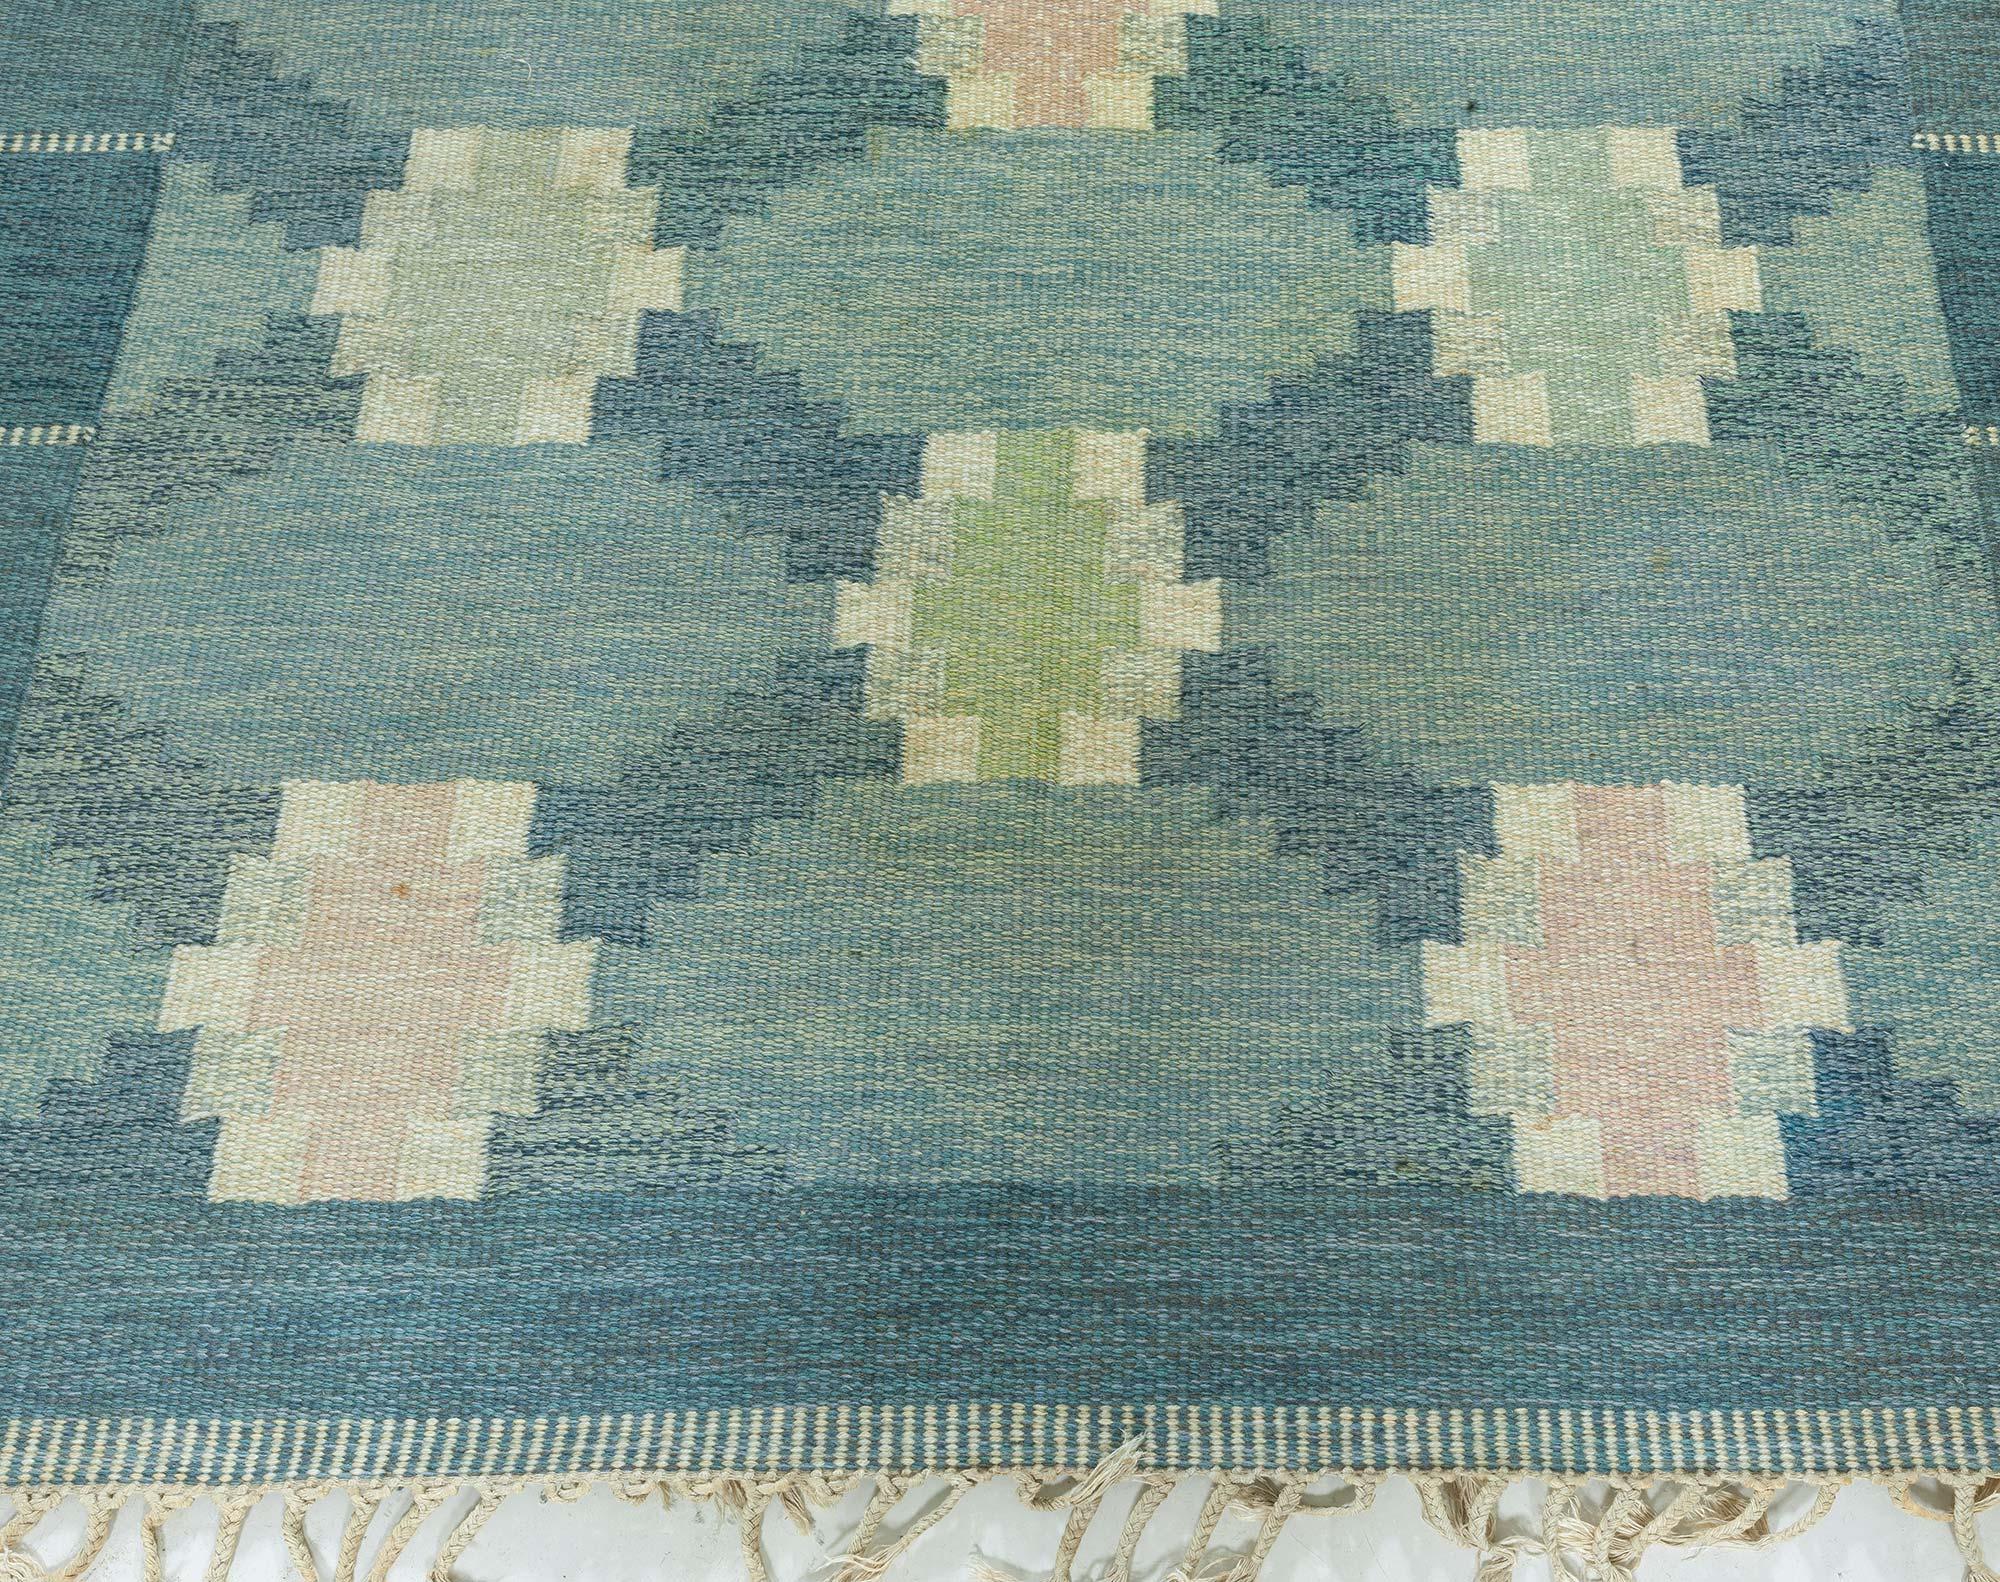 Hand-Woven Vintage Swedish Flat Woven Rug by Ingegerd Silow For Sale